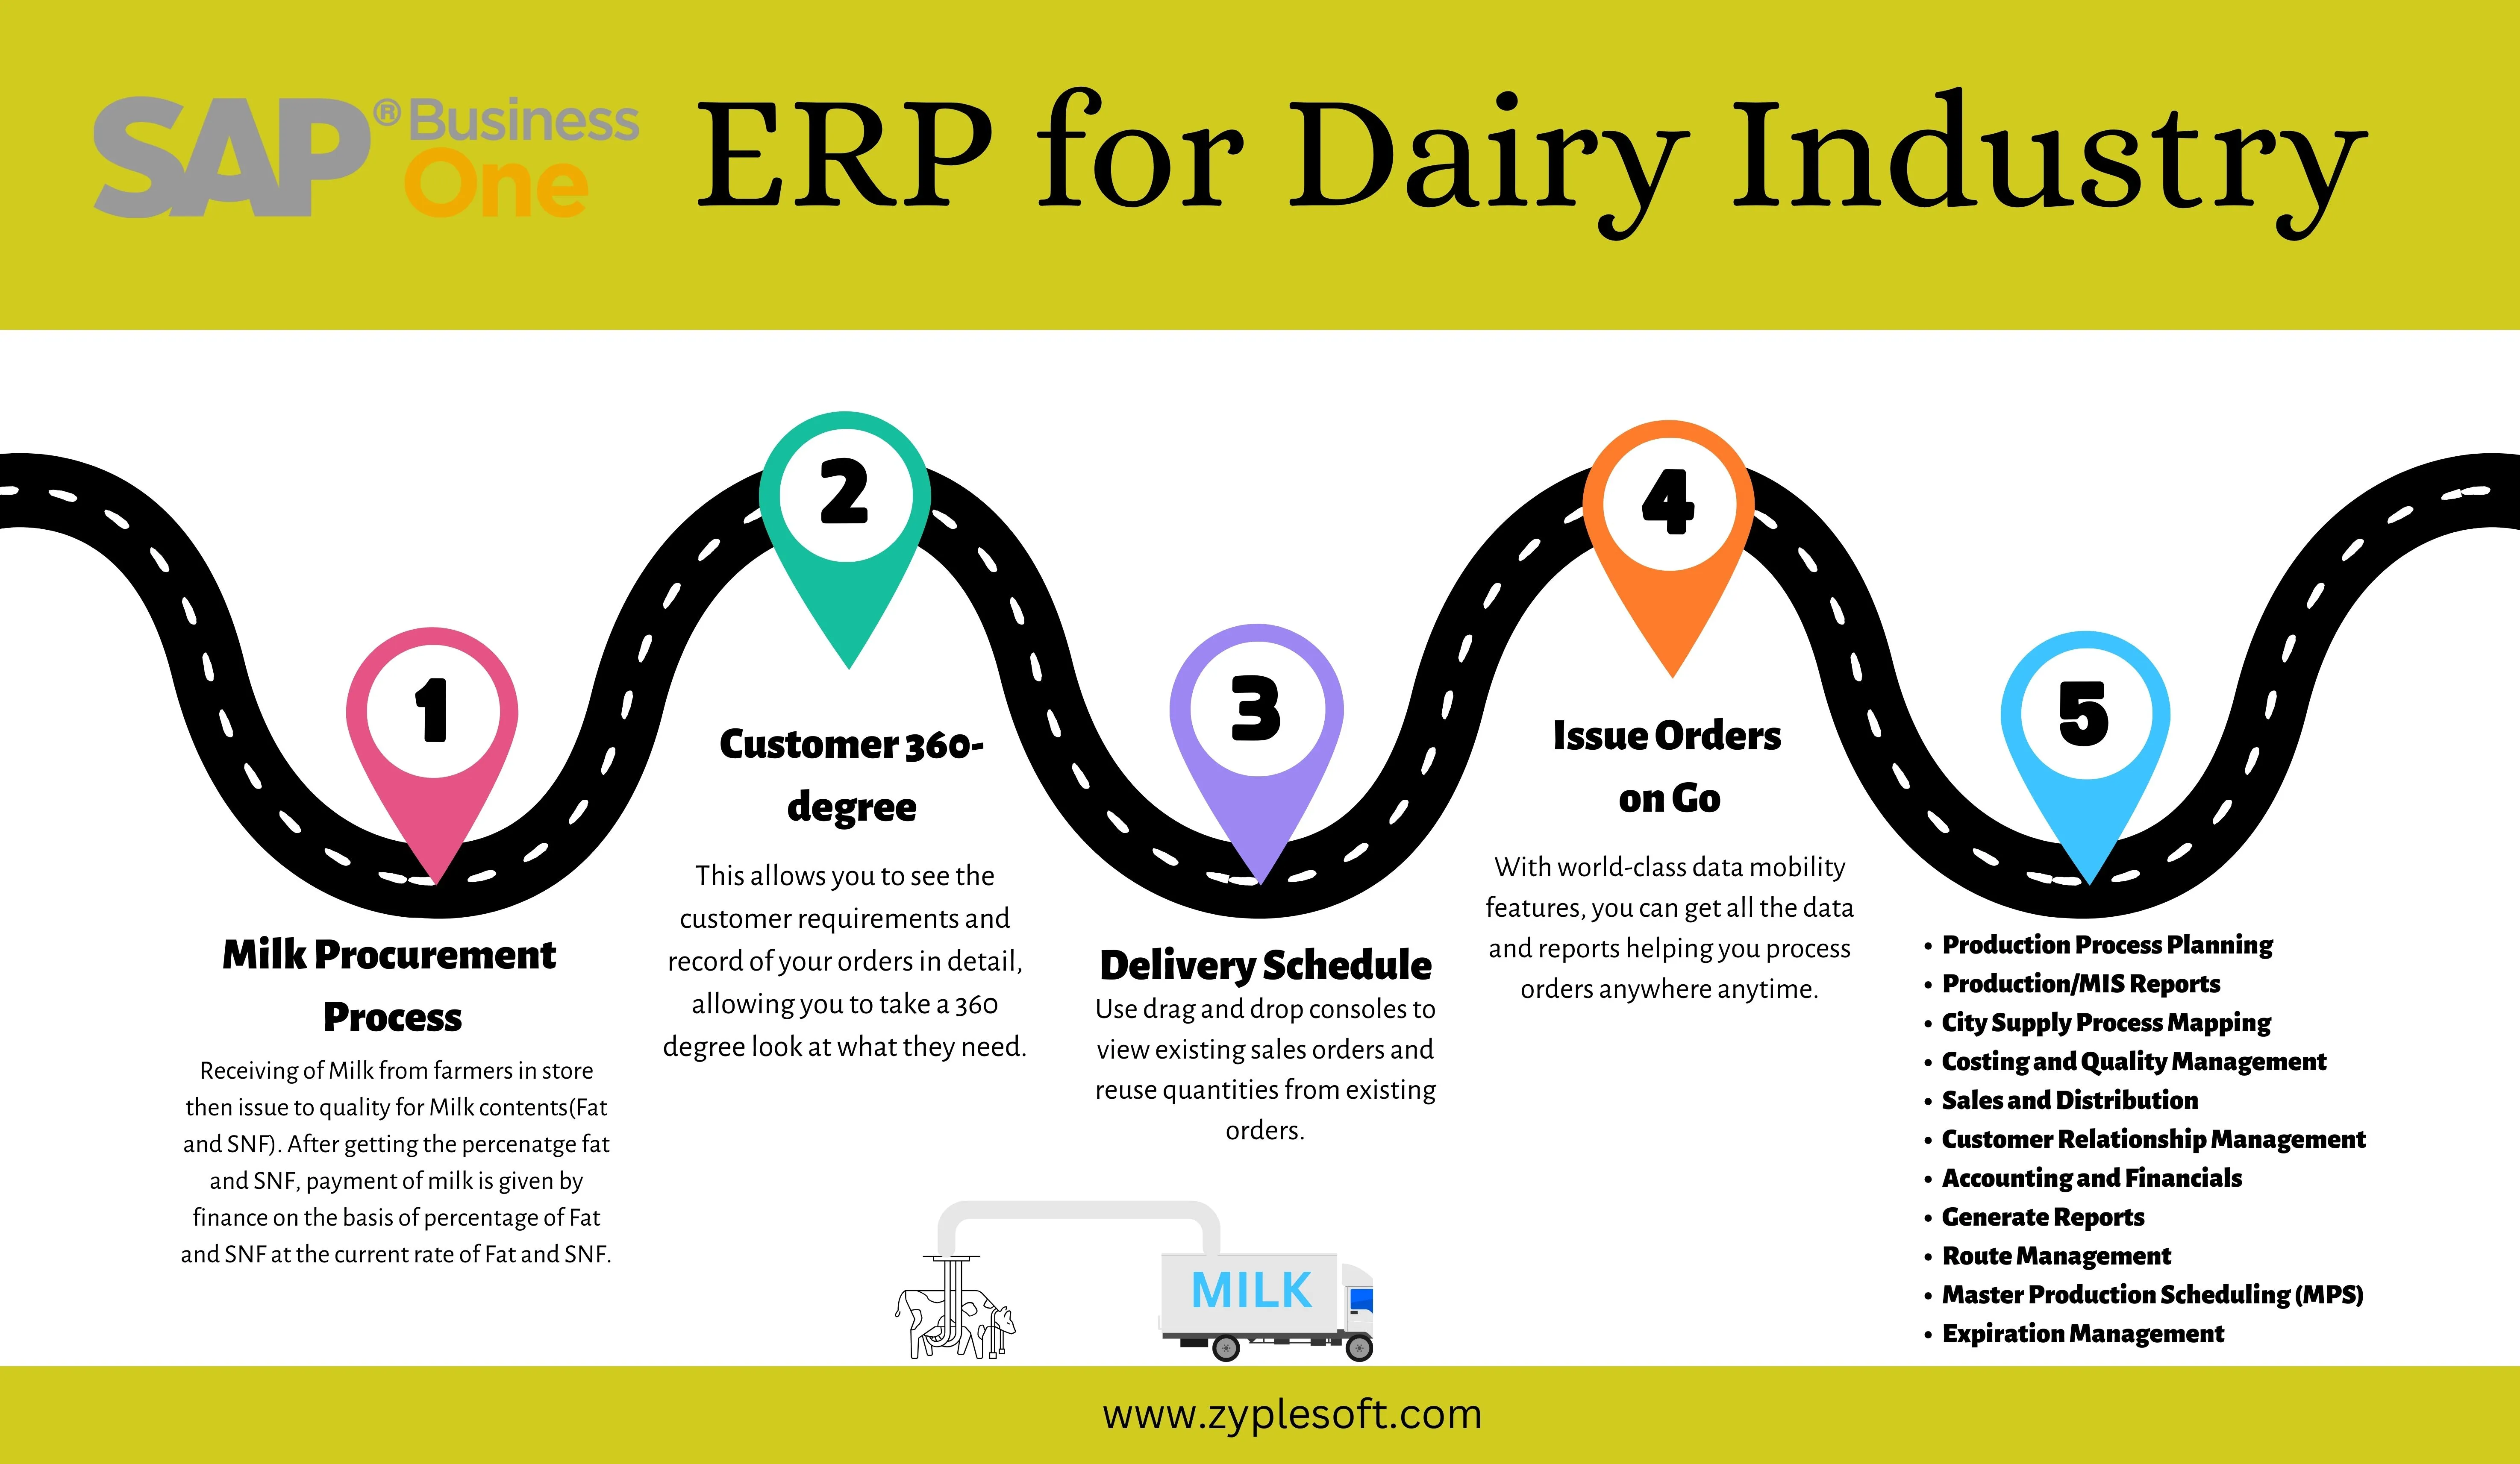 SAP Business One ERP for Dairy industry